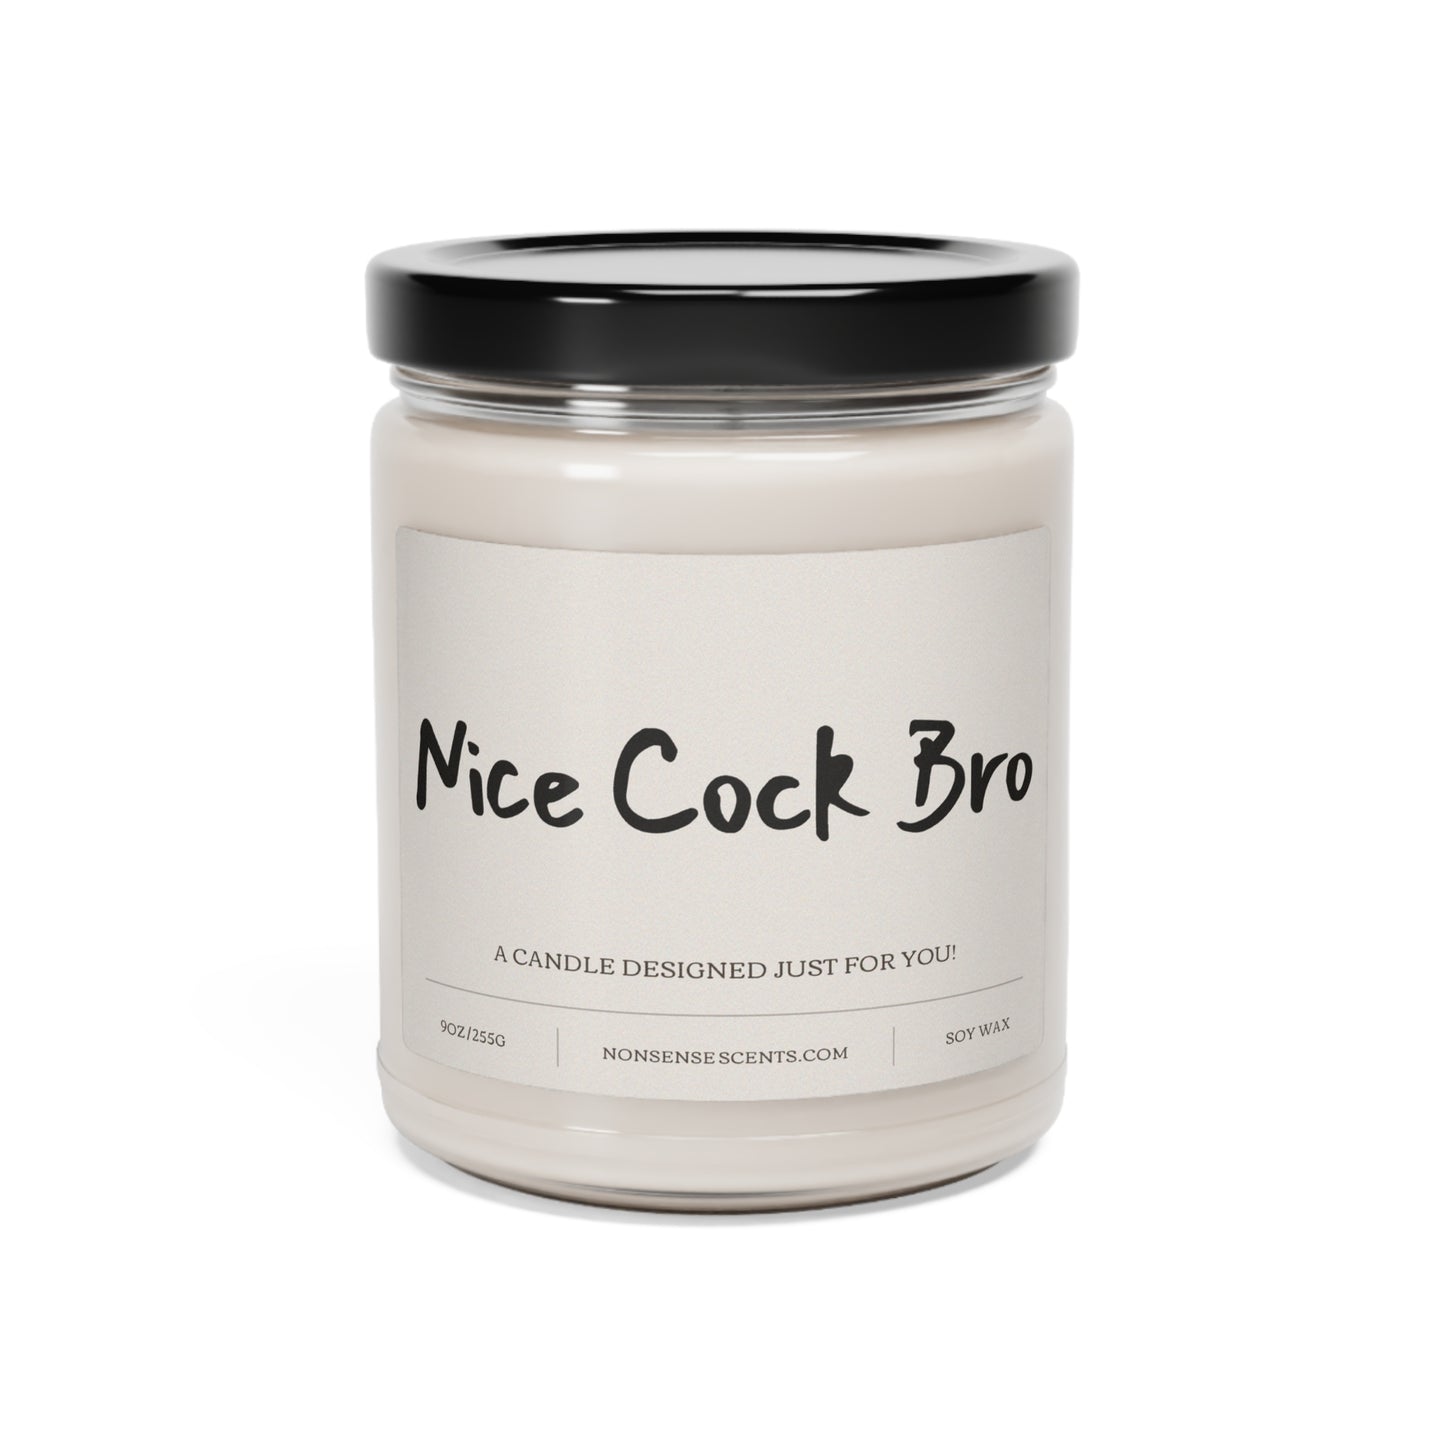 "Nice Cock Bro" Scented Candle